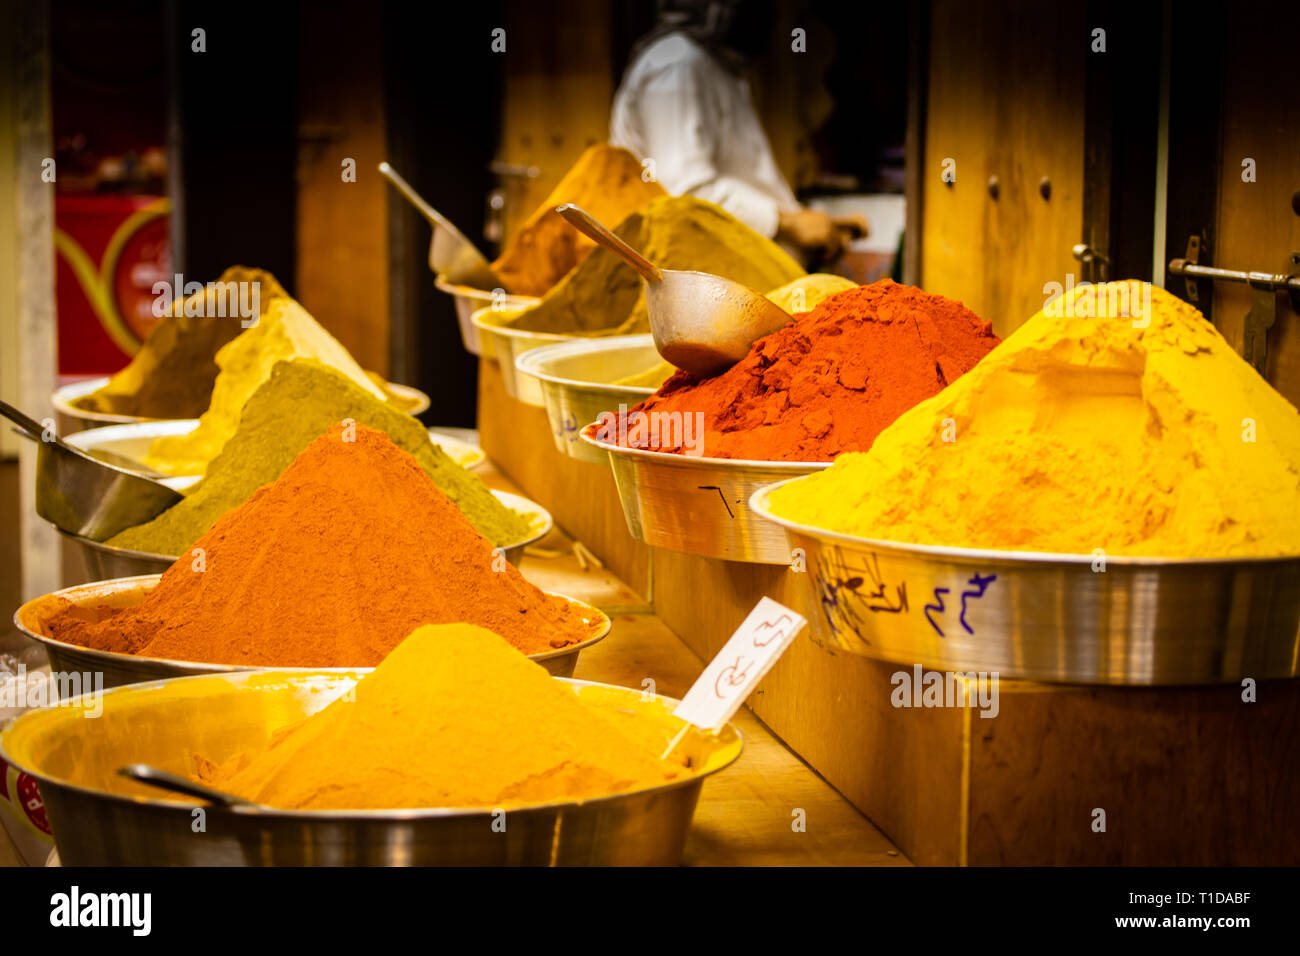 Various spices, displayed at a market near Abu Dhabi, UAE. Spices are part of the cultural heritage of the countries of the Middle East. Stock Photo